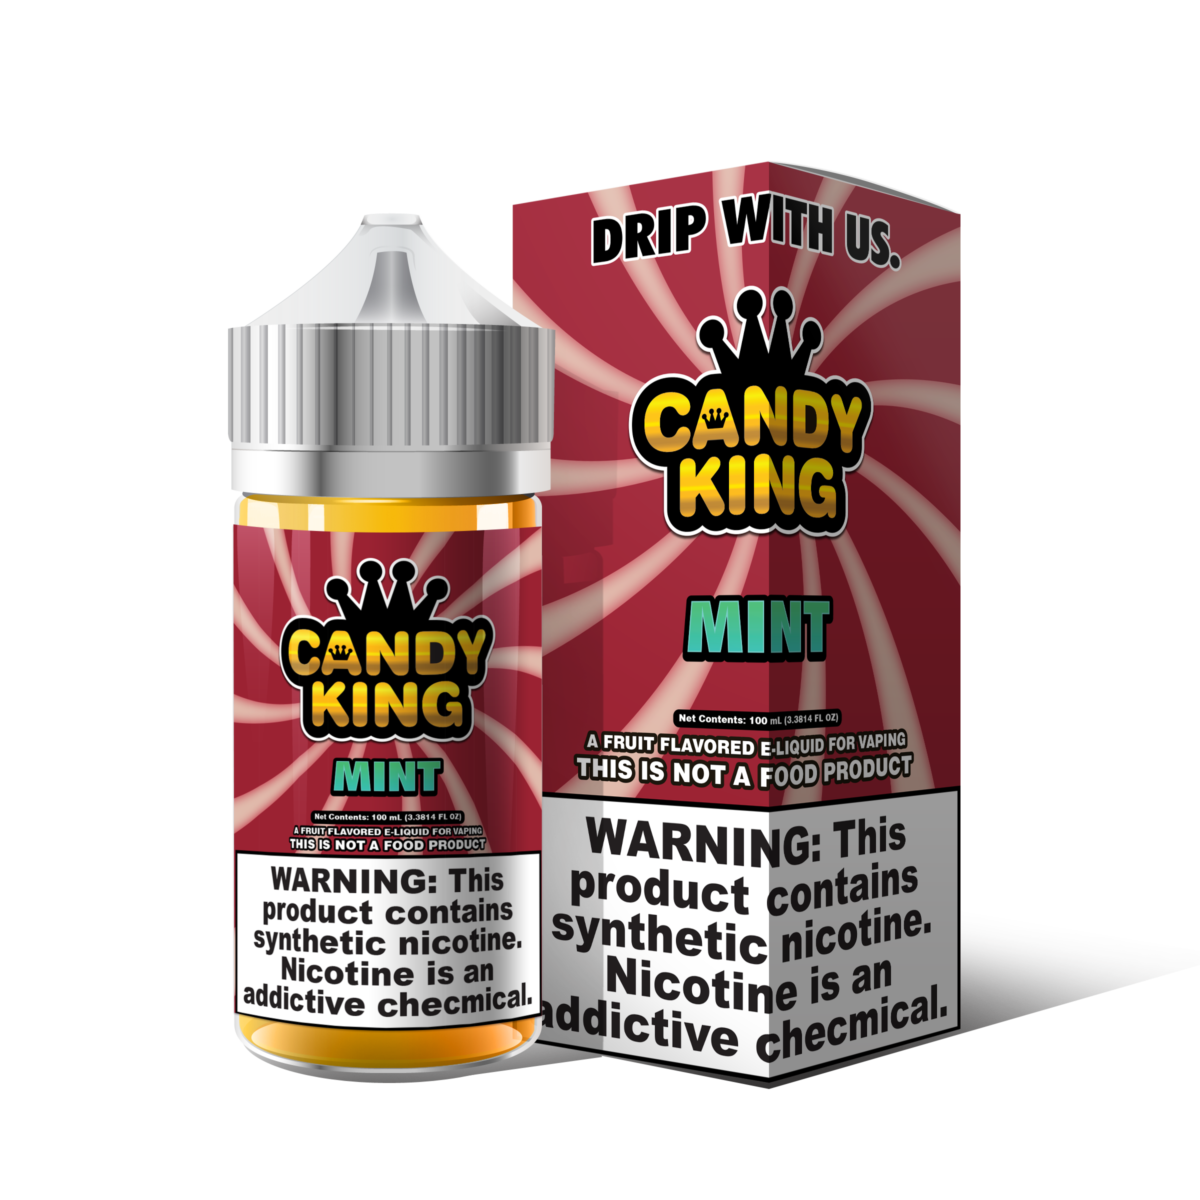 Mint by Candy King Series 100mL with Packaging